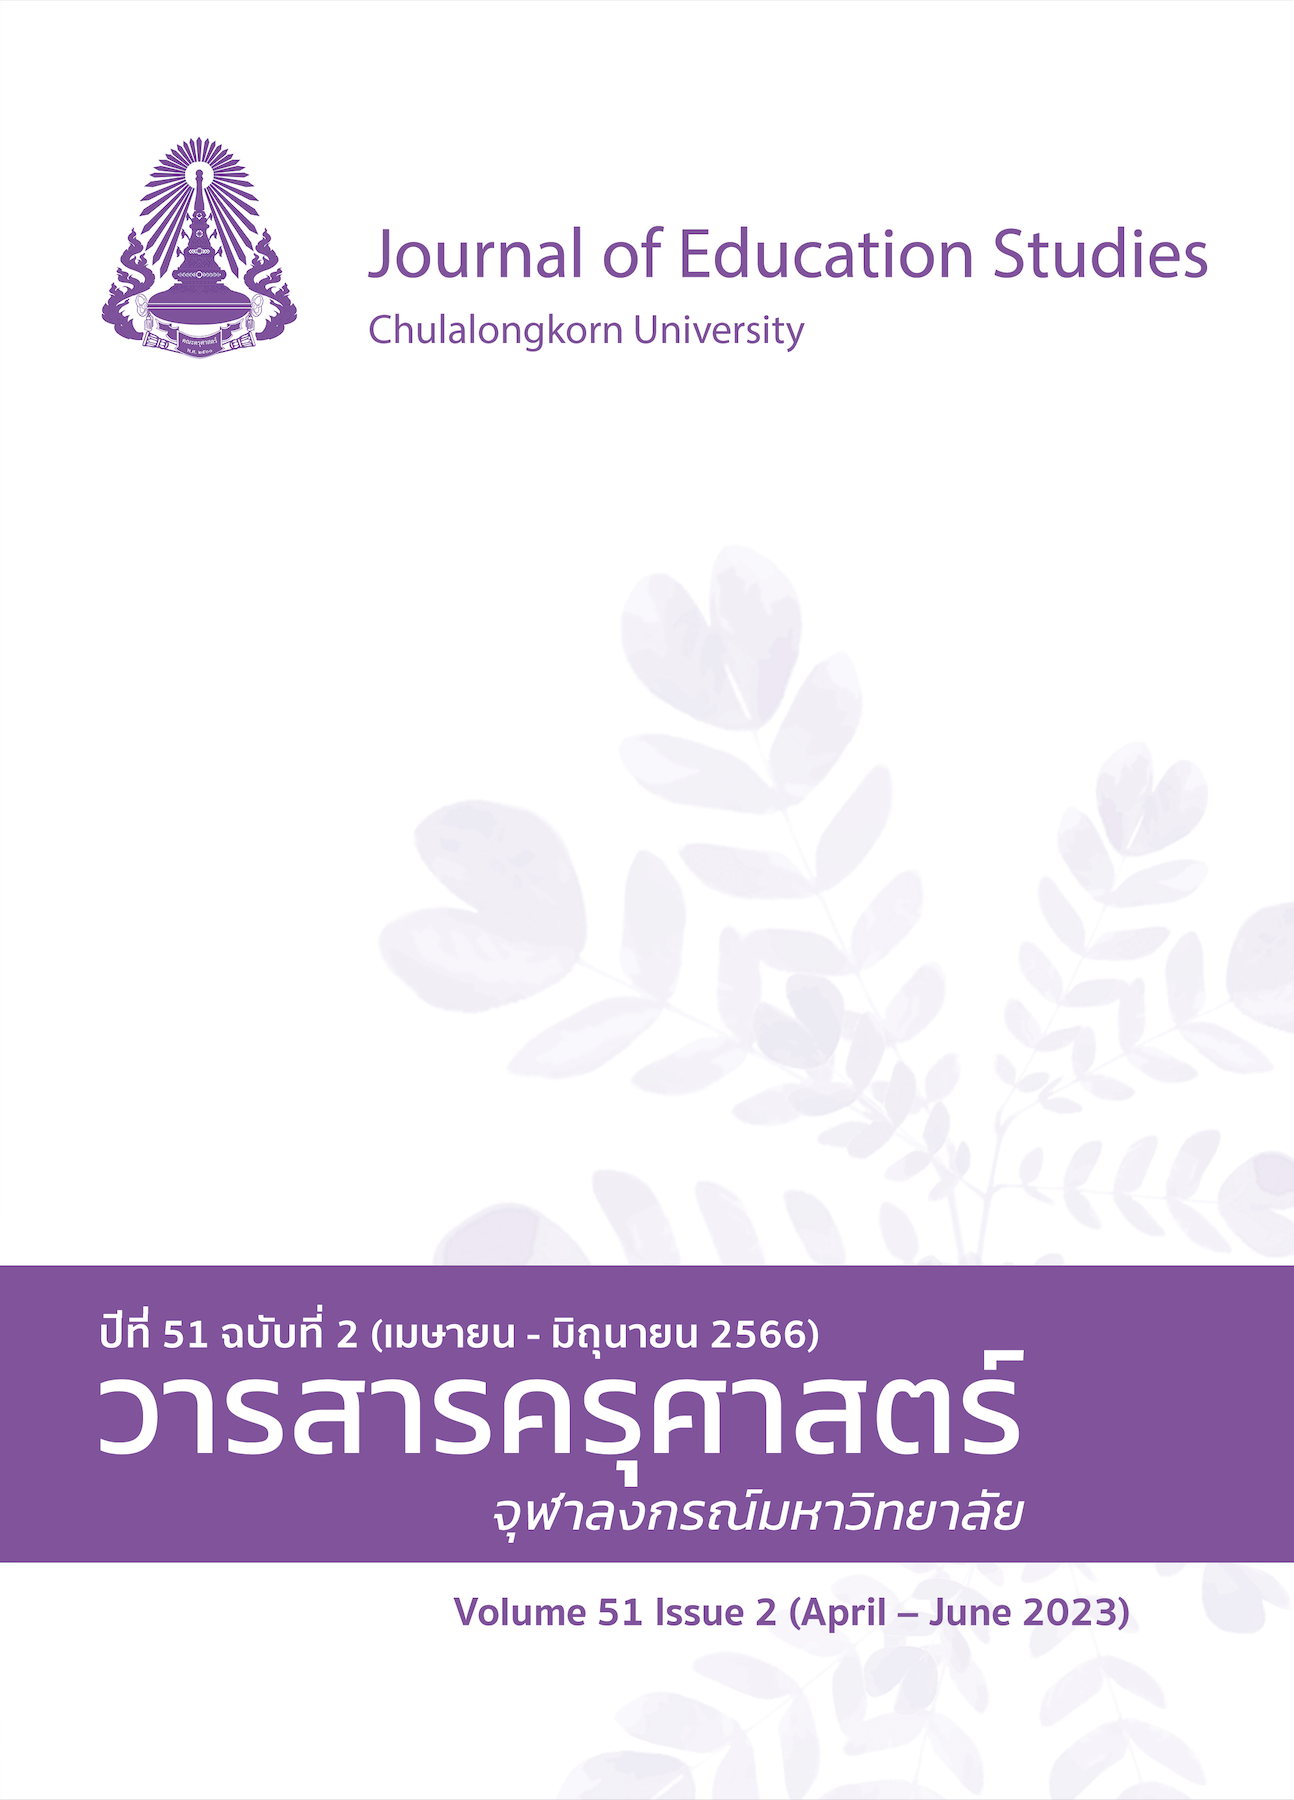 					View Journal of Education Studies, Volume 51 Issue 2 (April - June 2023) 
				